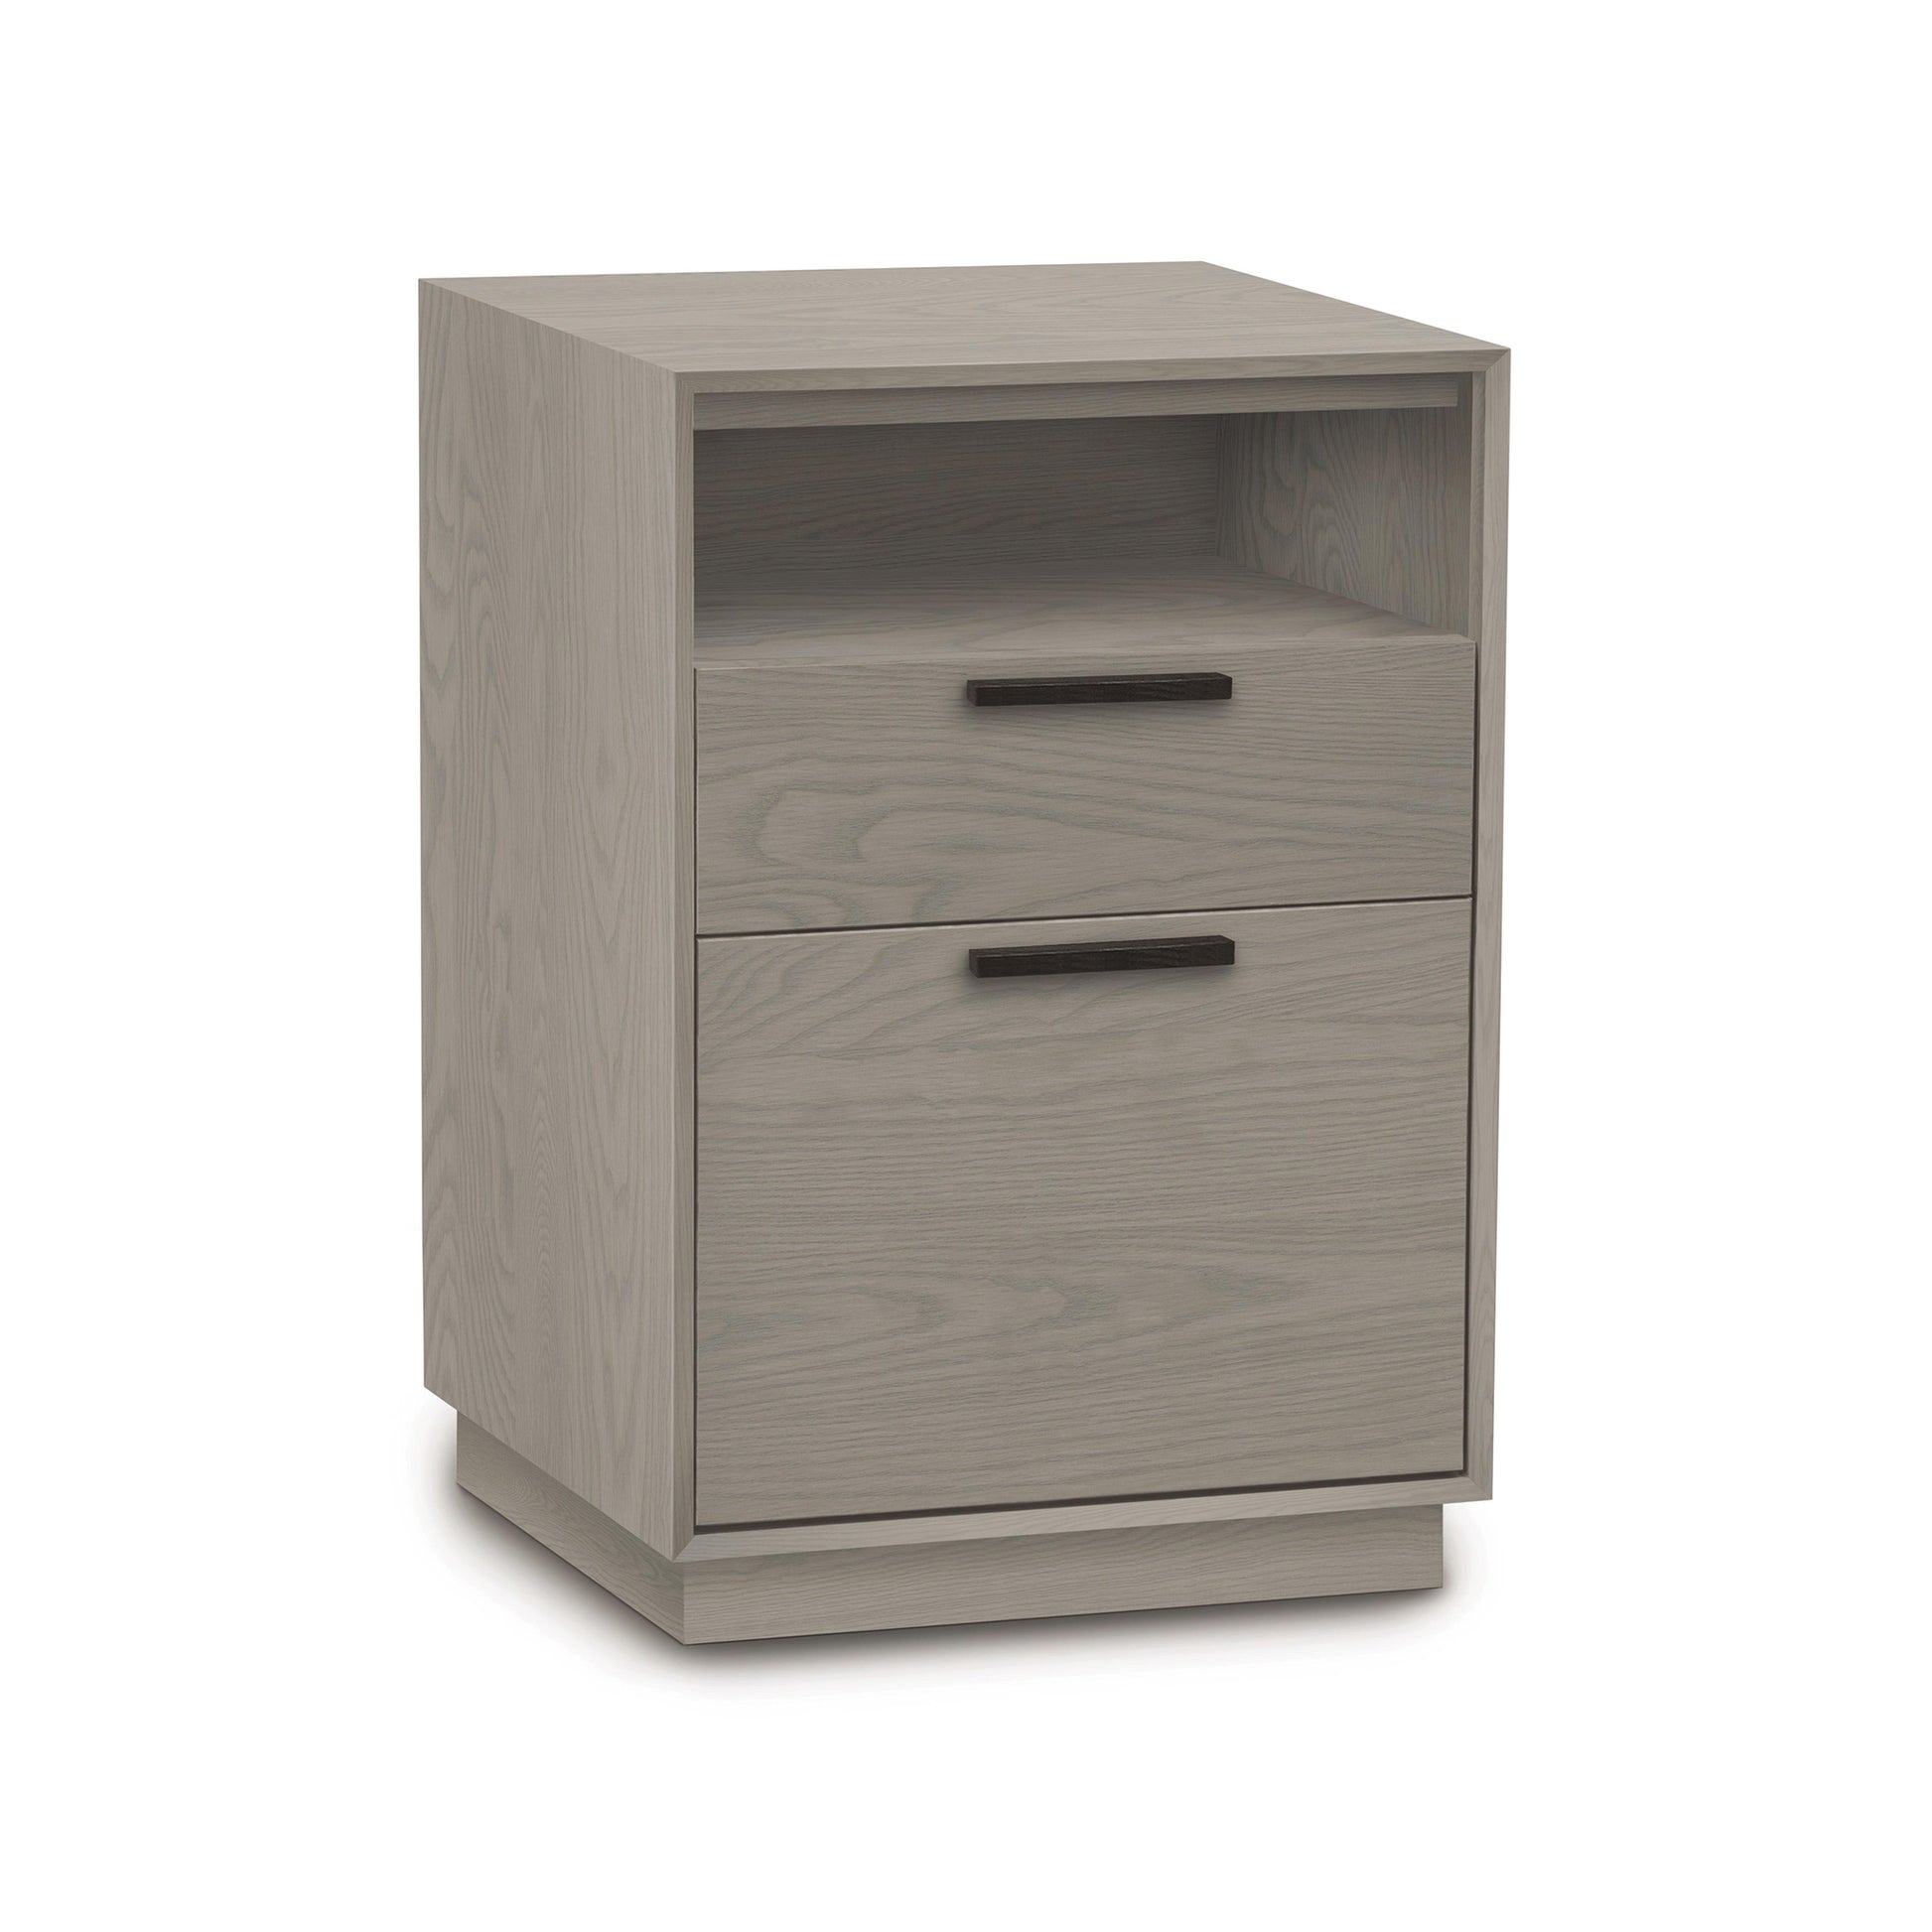 A Copeland Furniture Linear Narrow Rolling File Cabinet with Cubby with two drawers made of grey wood.